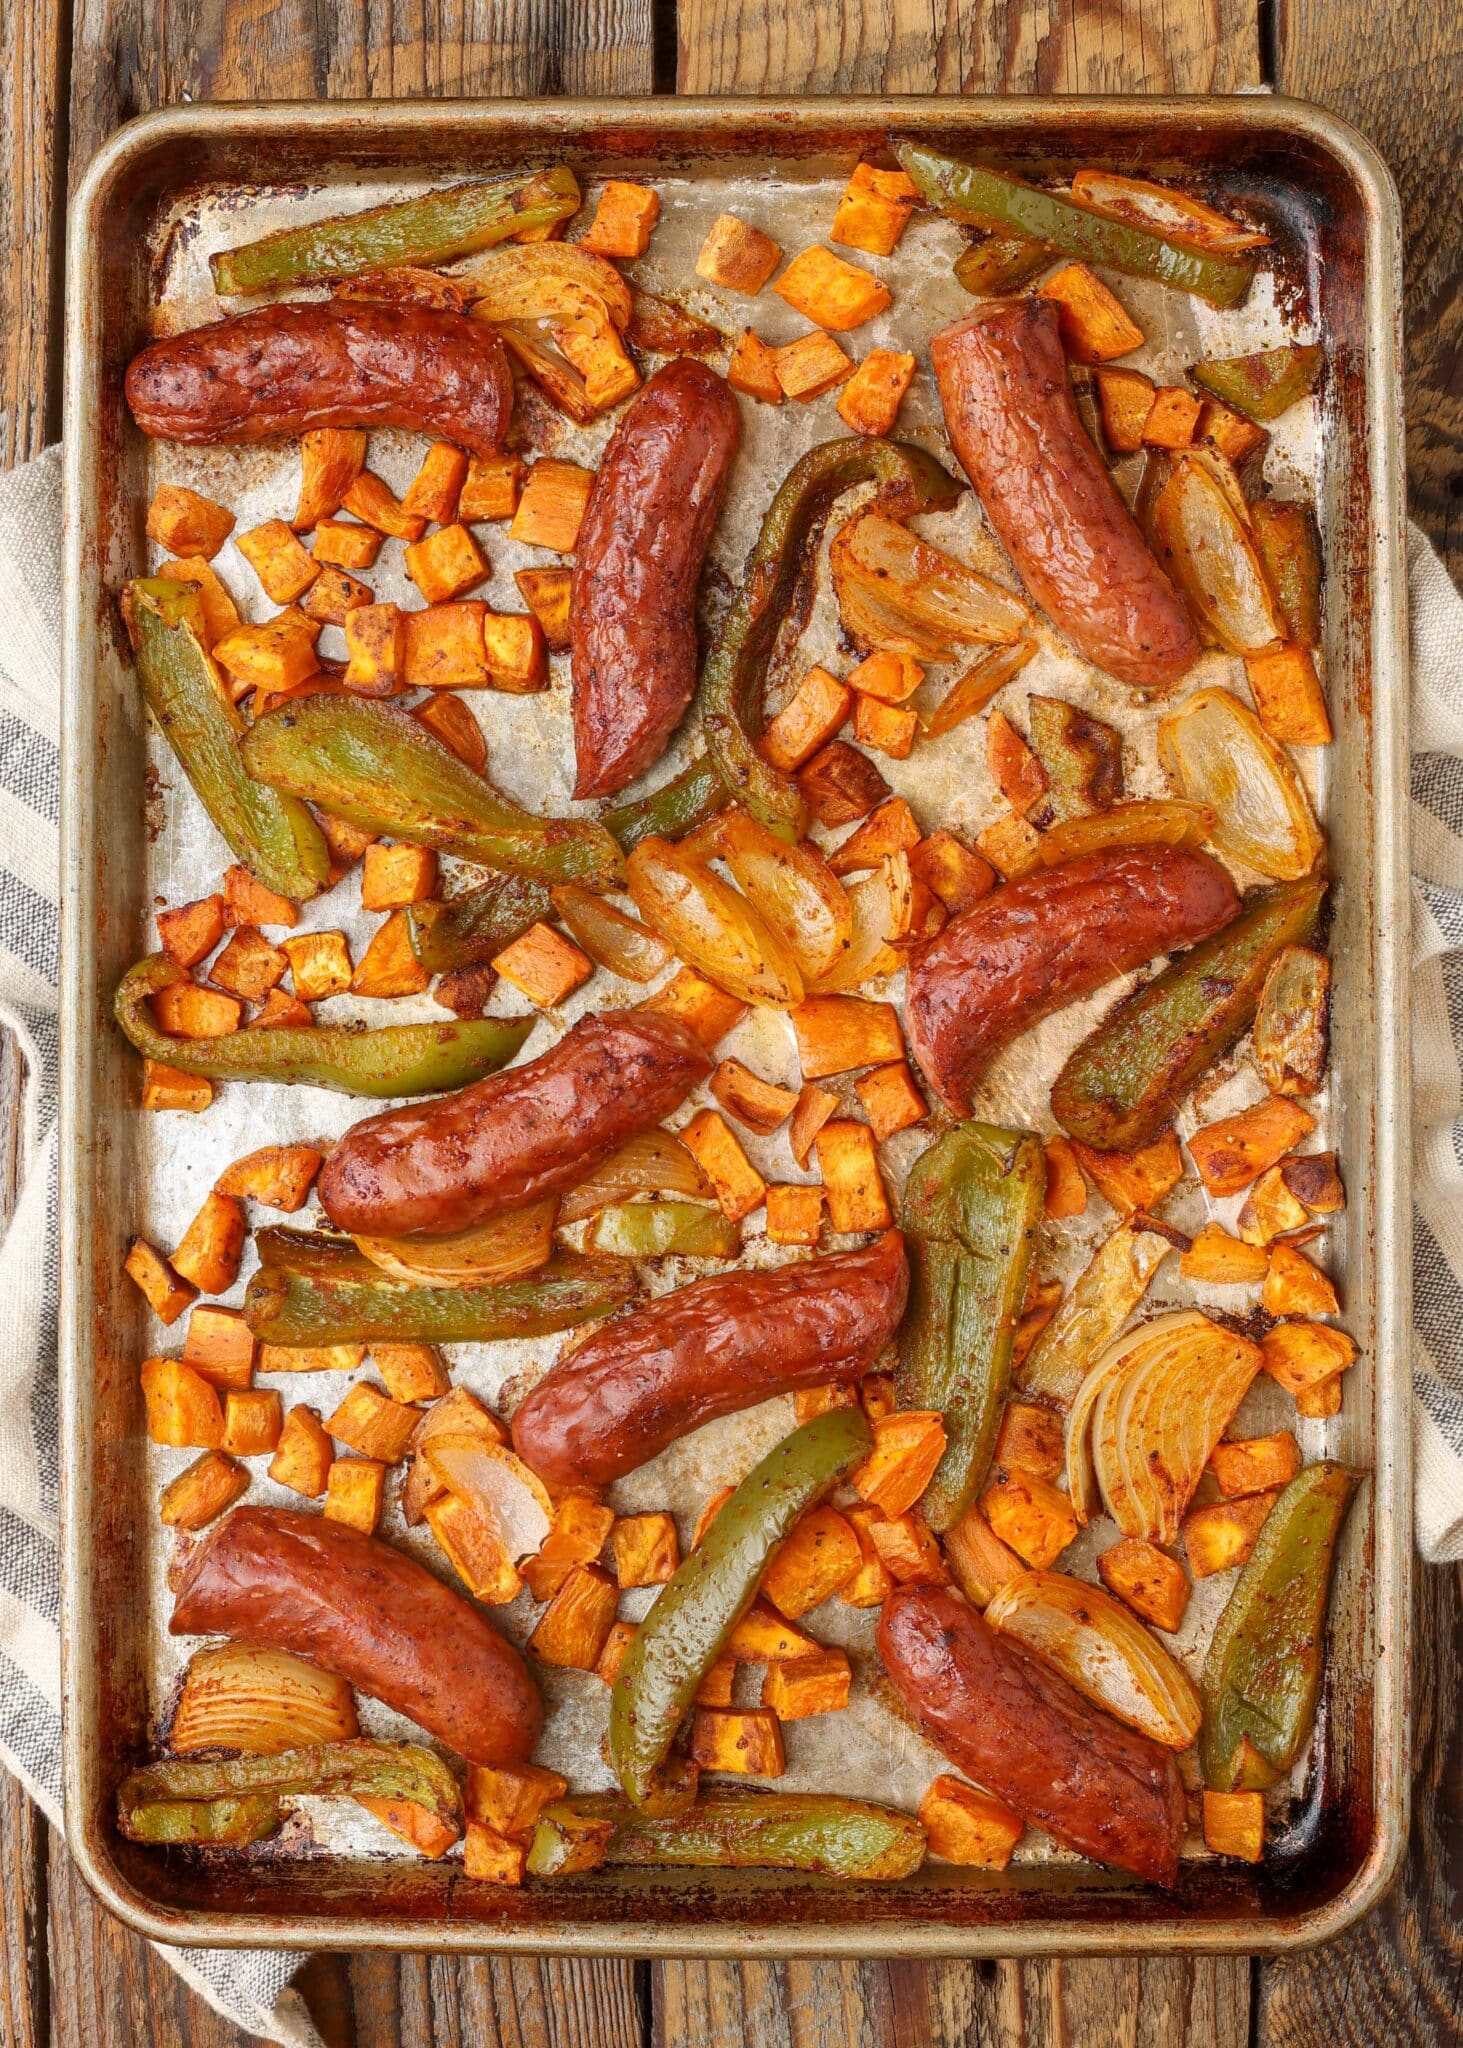 peppers, onions, and sausage on sheet pan with towel